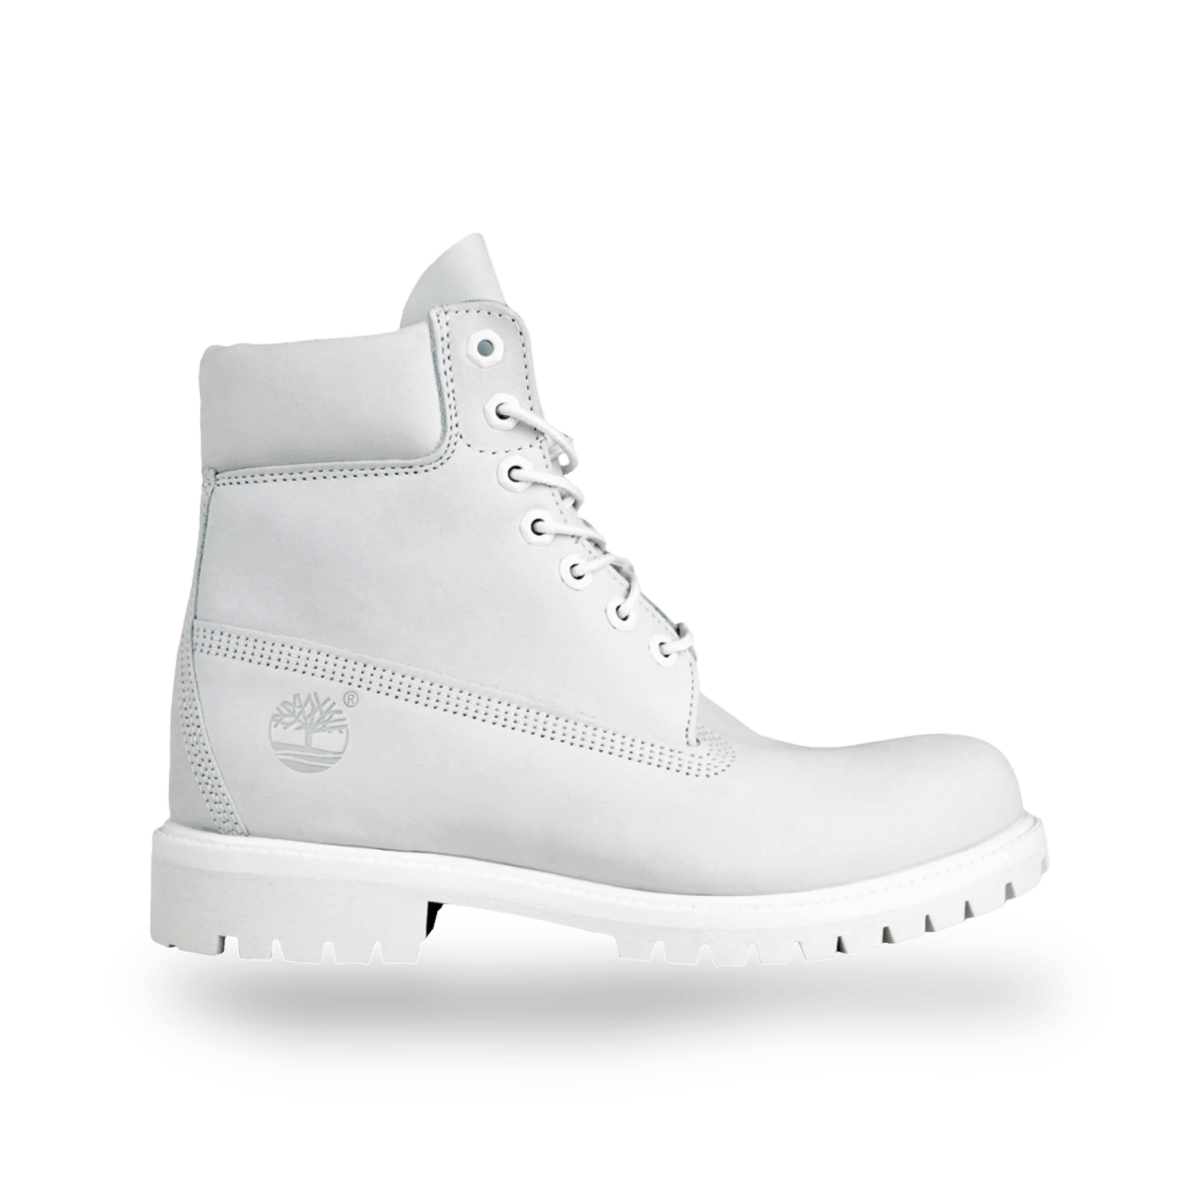 Timberland 6 Inch Premium Boot 'Ghost White' - Boot - Jawns on Fire Sneakers & Streetwear